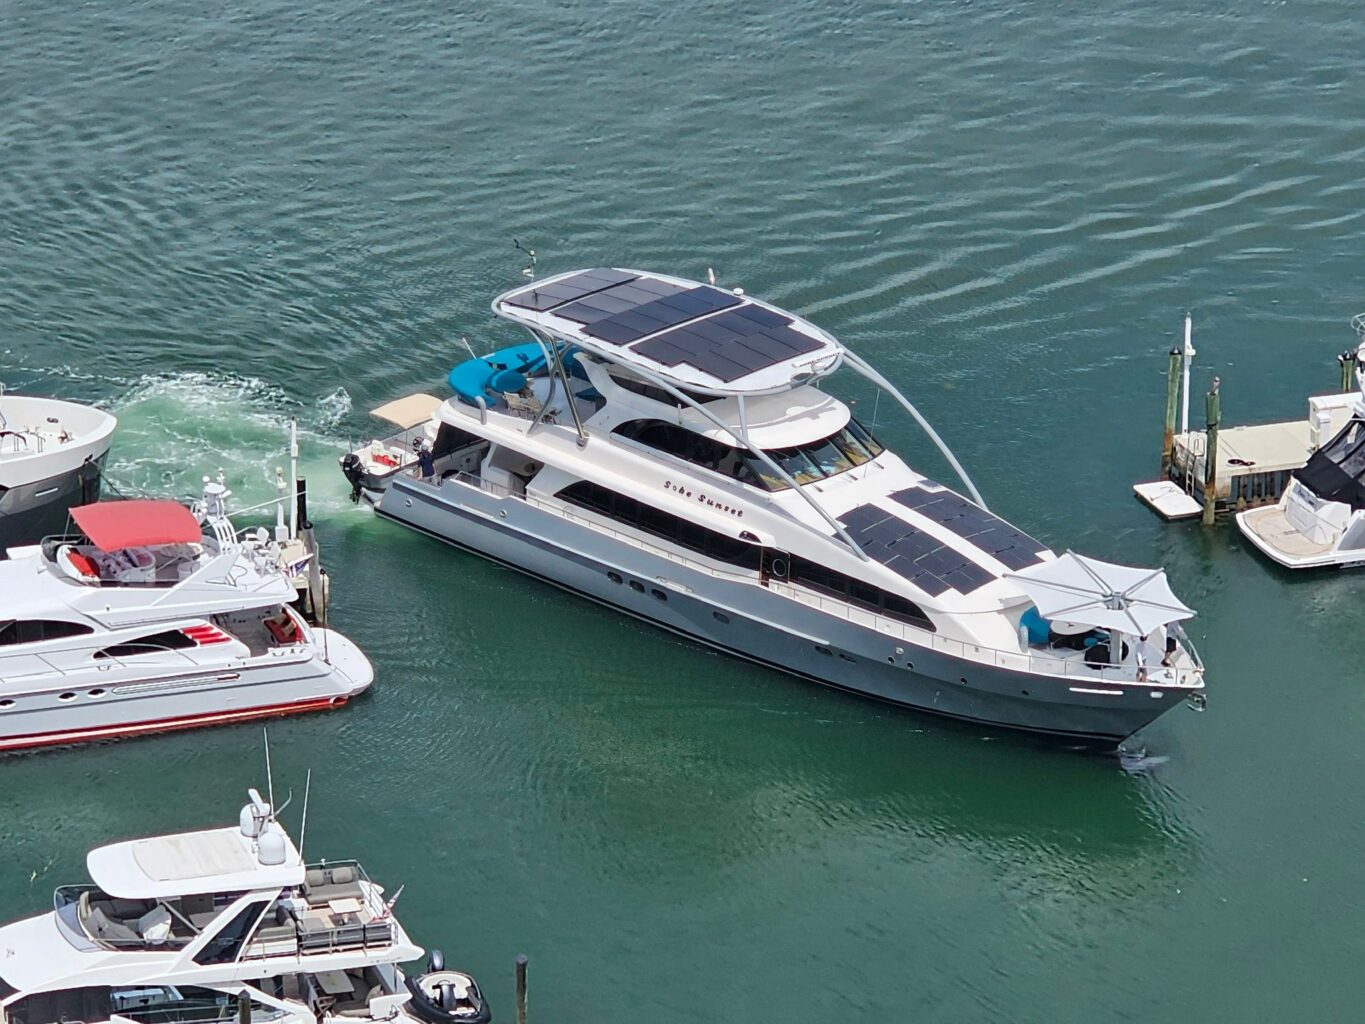 Aerial view of recreational boat equipped with solar panels and bidirectional dc dc converters from epic power